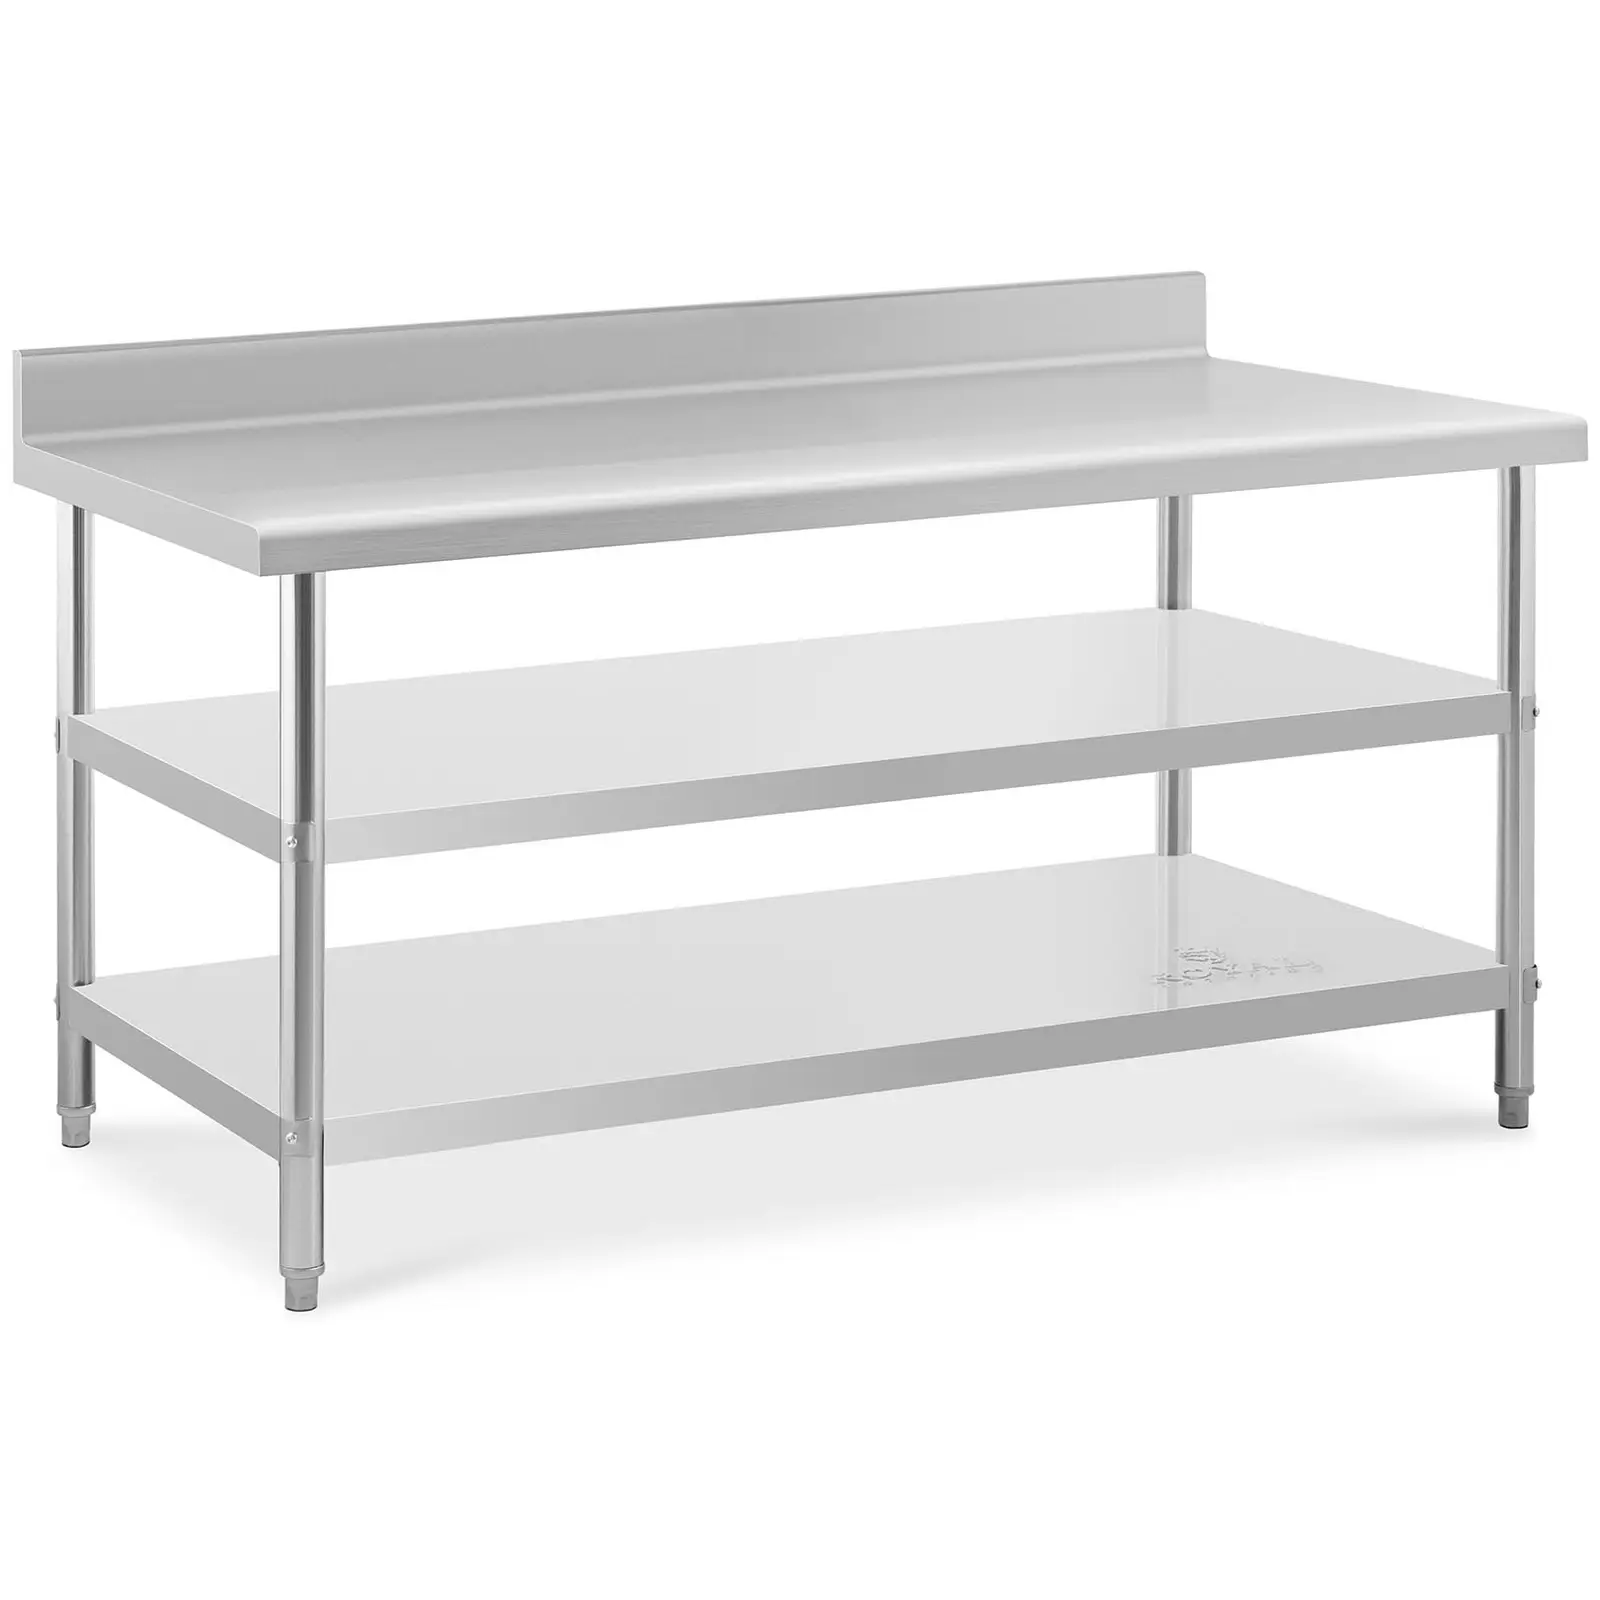 Stainless steel table with backsplash - 180 x 90 x 16.5 cm - 231 kg - 2 shelves - Royal Catering